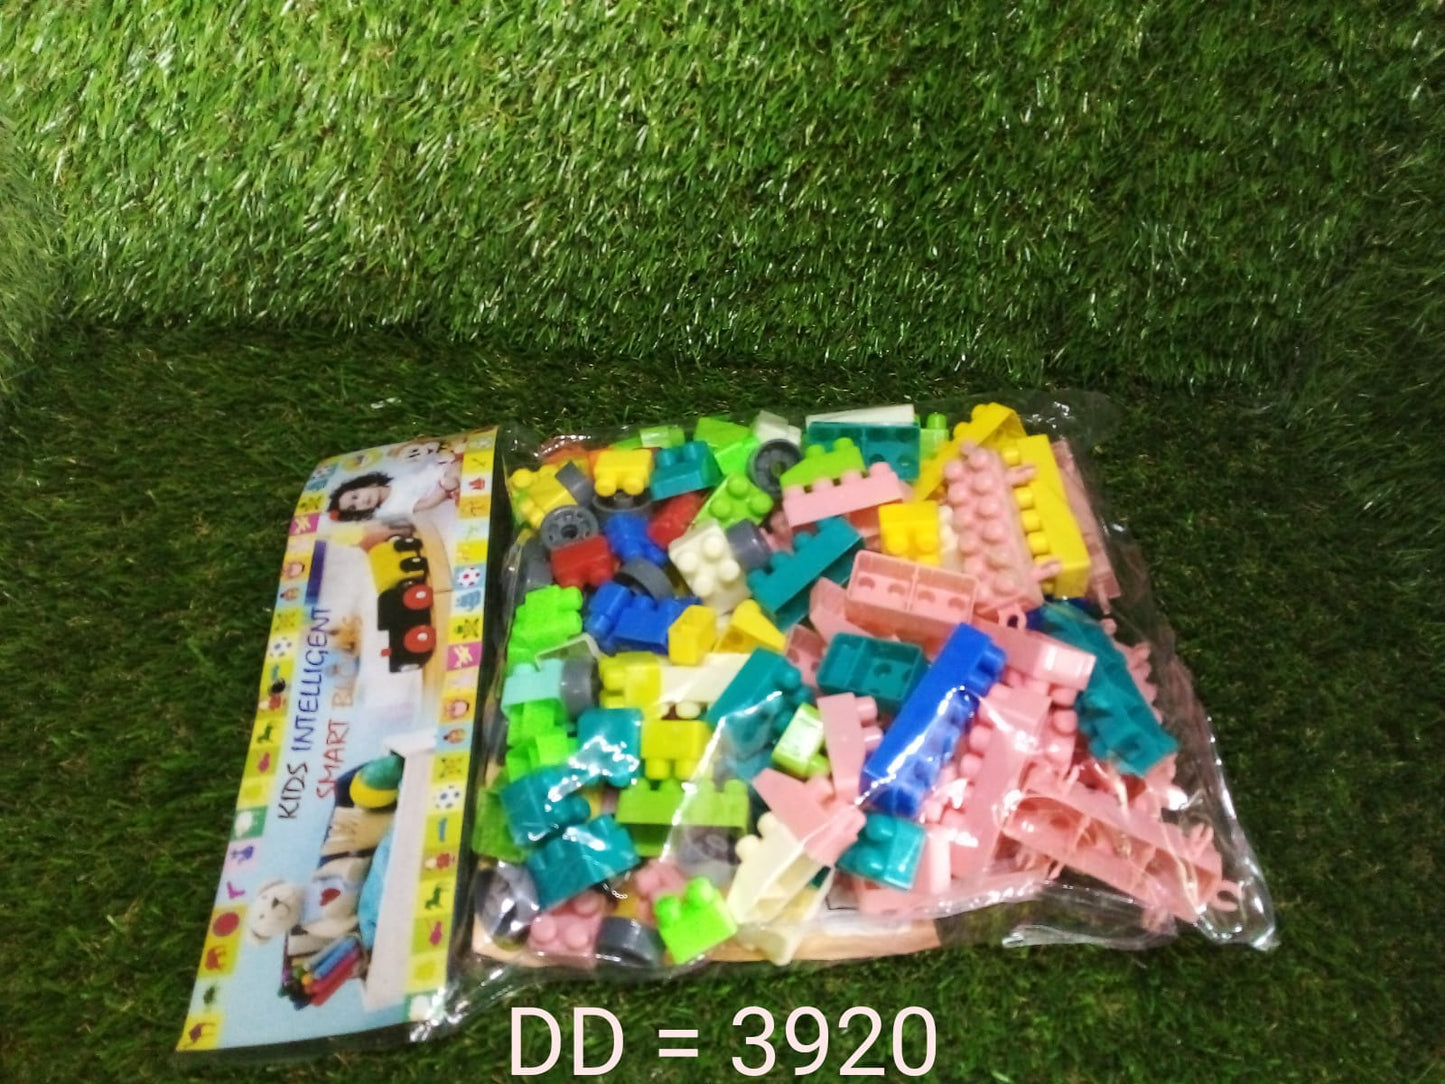 3920 200 Pc Train Candy Toy used in all kinds of household and official places specially for kids and children for their playing and enjoying purposes. DeoDap